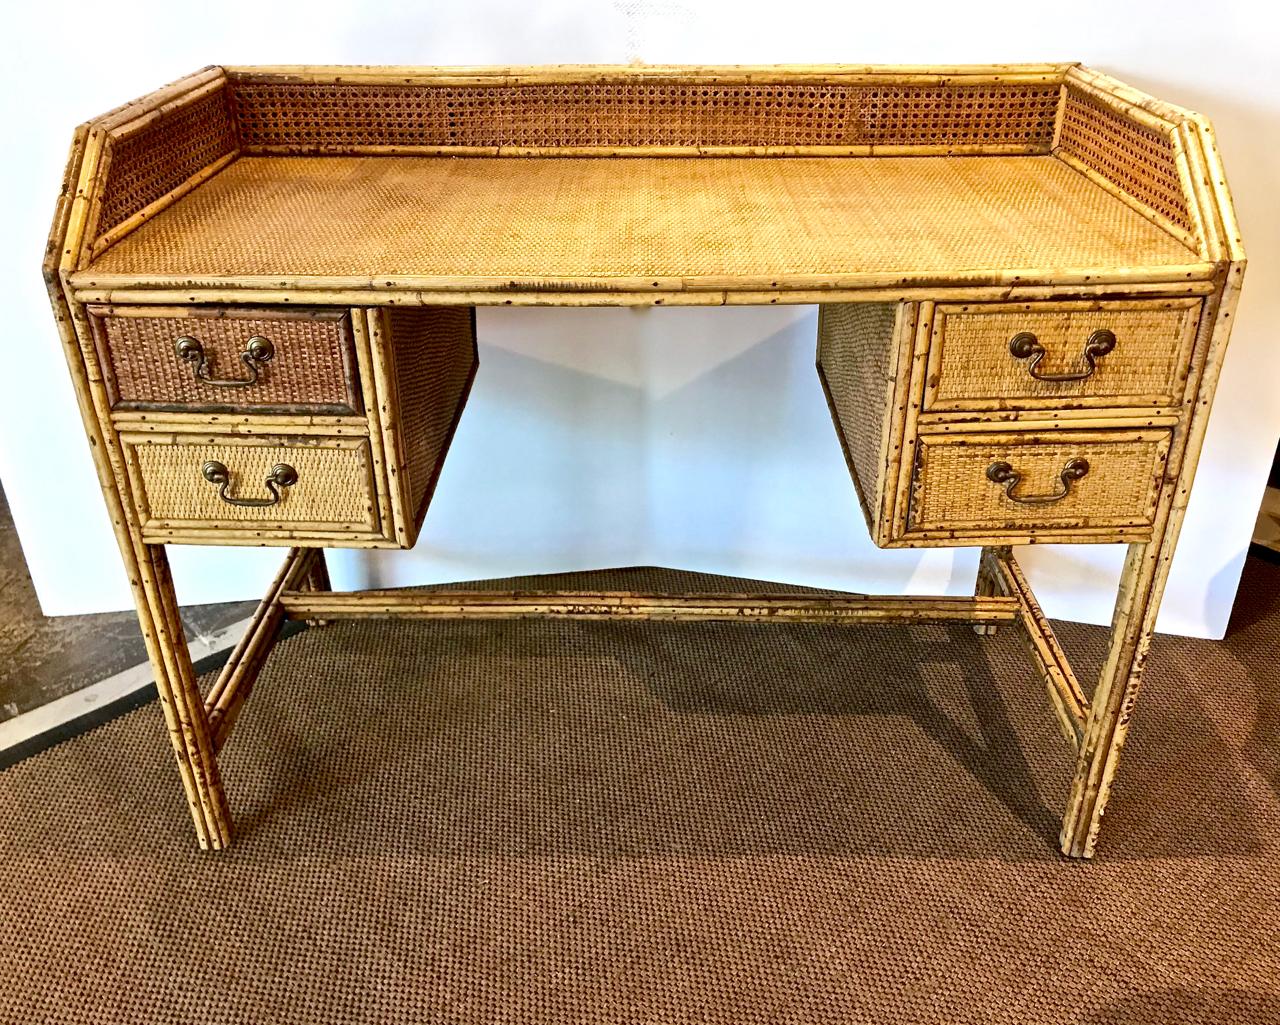 This is a wonderful circa 1930s bamboo, rattan and cane writing desk or dressing table in original condition. The photos speak to the highly decorative, but practical, design of the desk. Perfect East Coast cottage style.